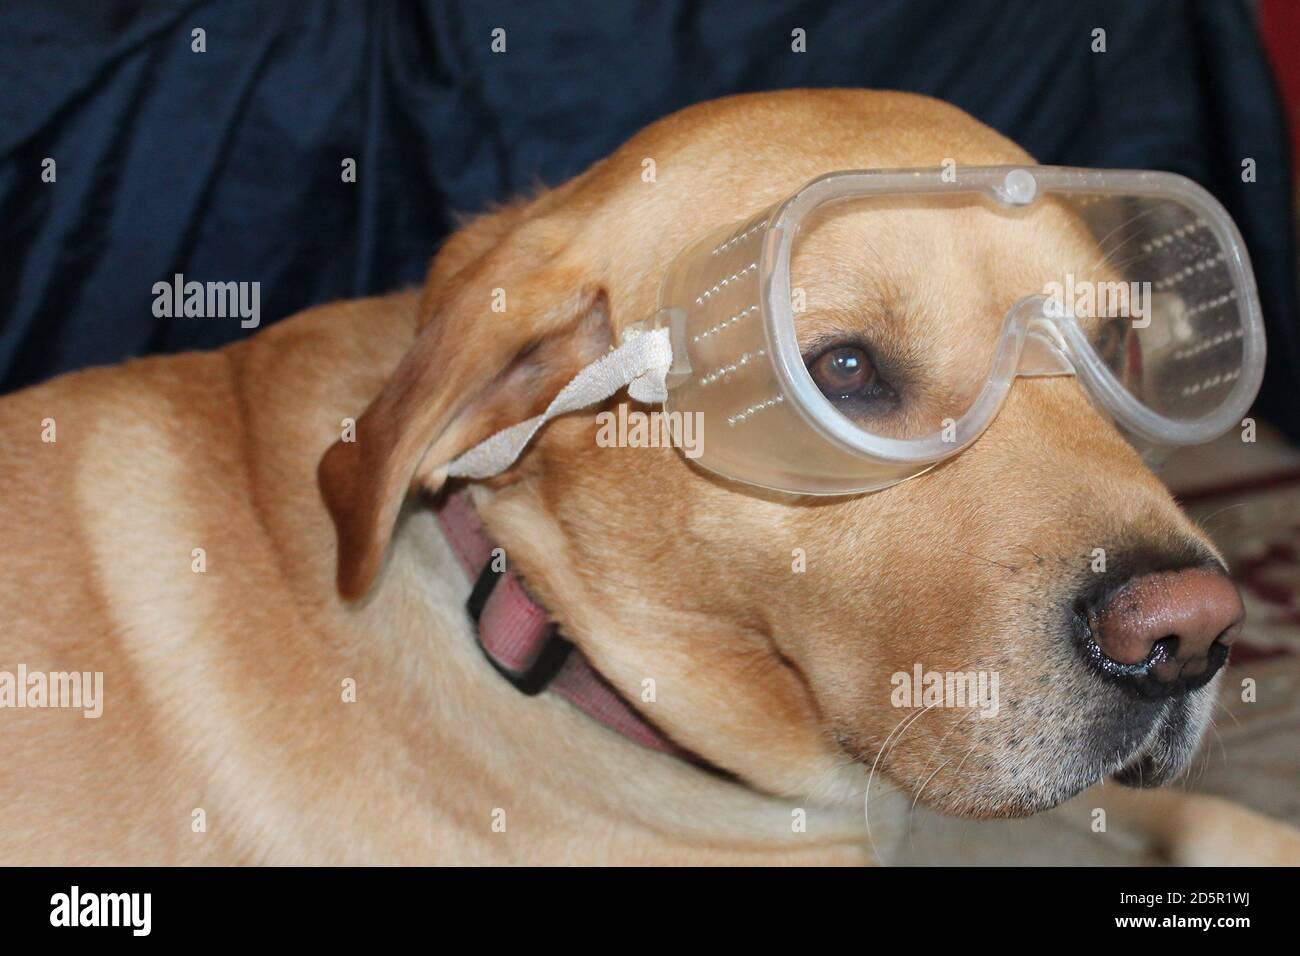 Dog wearing safety googles for eye protection against allergies Stock Photo